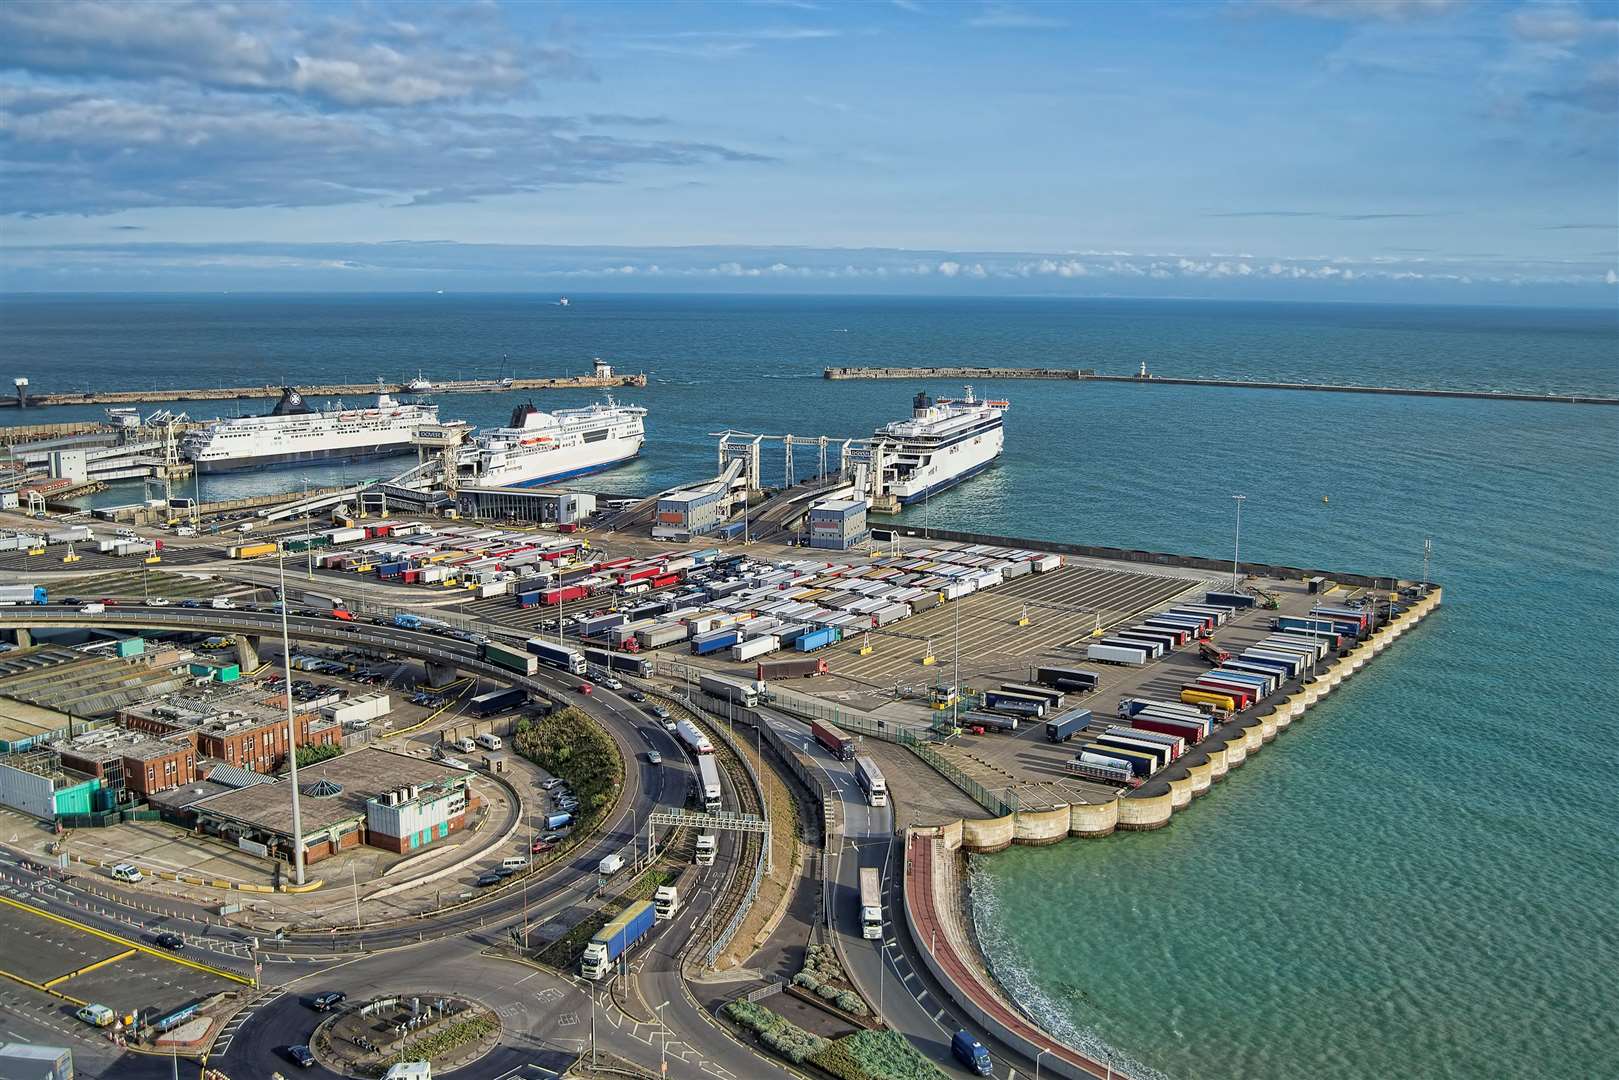 Ferry operators warn passengers of 90-minute delays to reach border checks in Dover